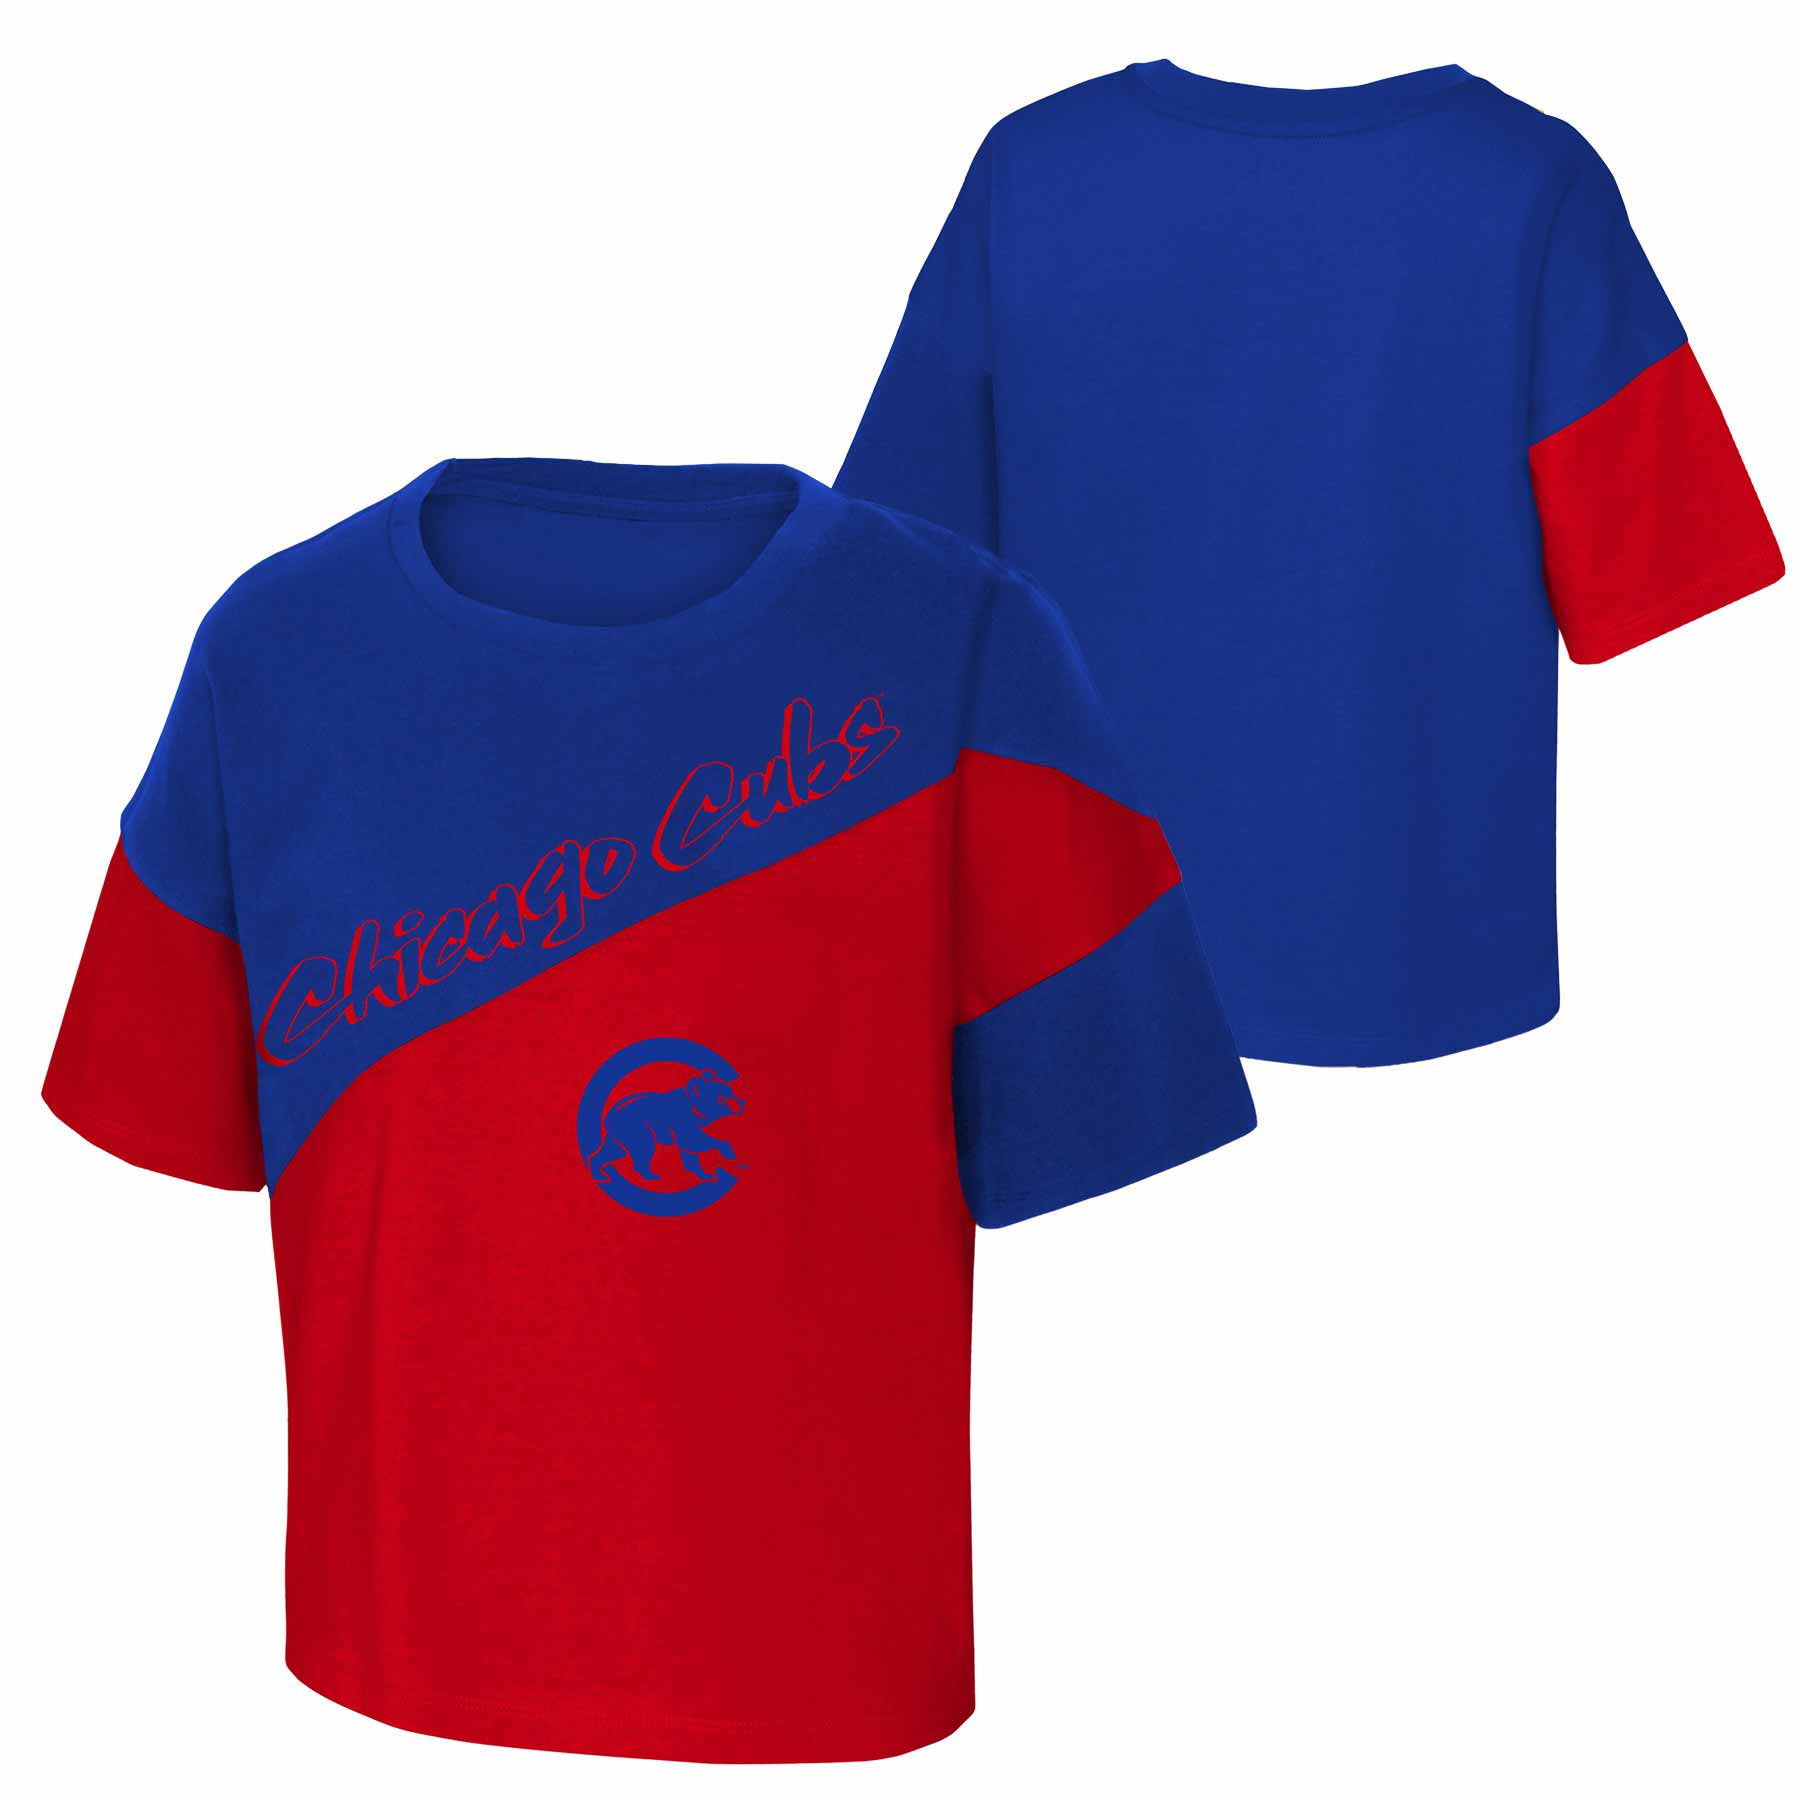 T-Shirts of Chicago Cubs for Men, Women and Youth